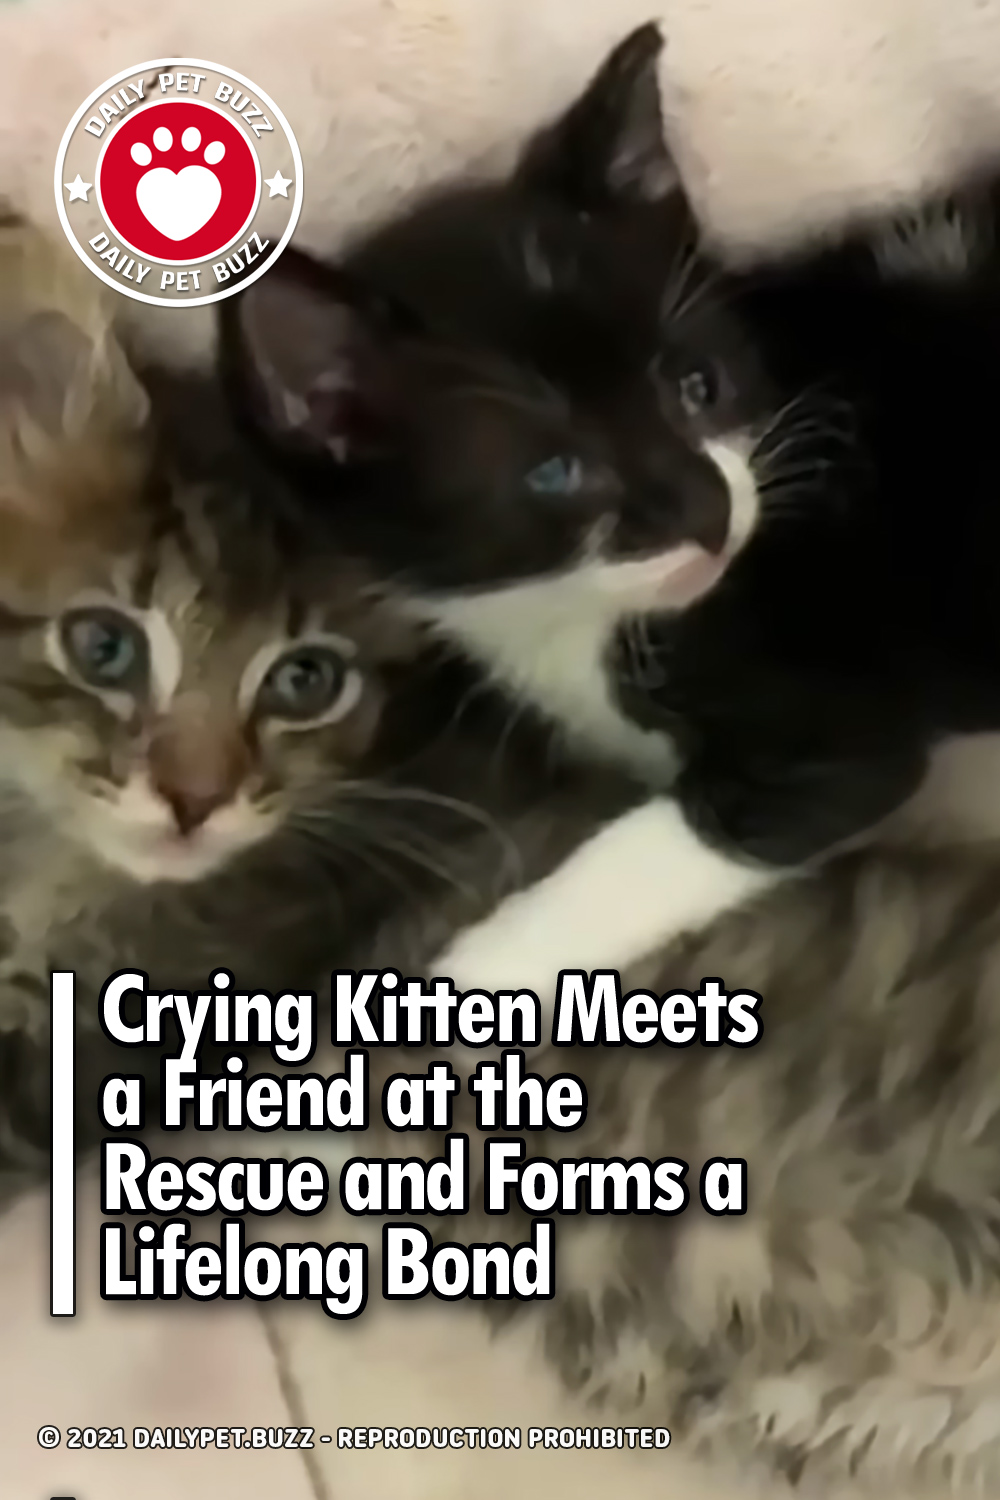 Crying Kitten Meets a Friend at the Rescue and Forms a Lifelong Bond